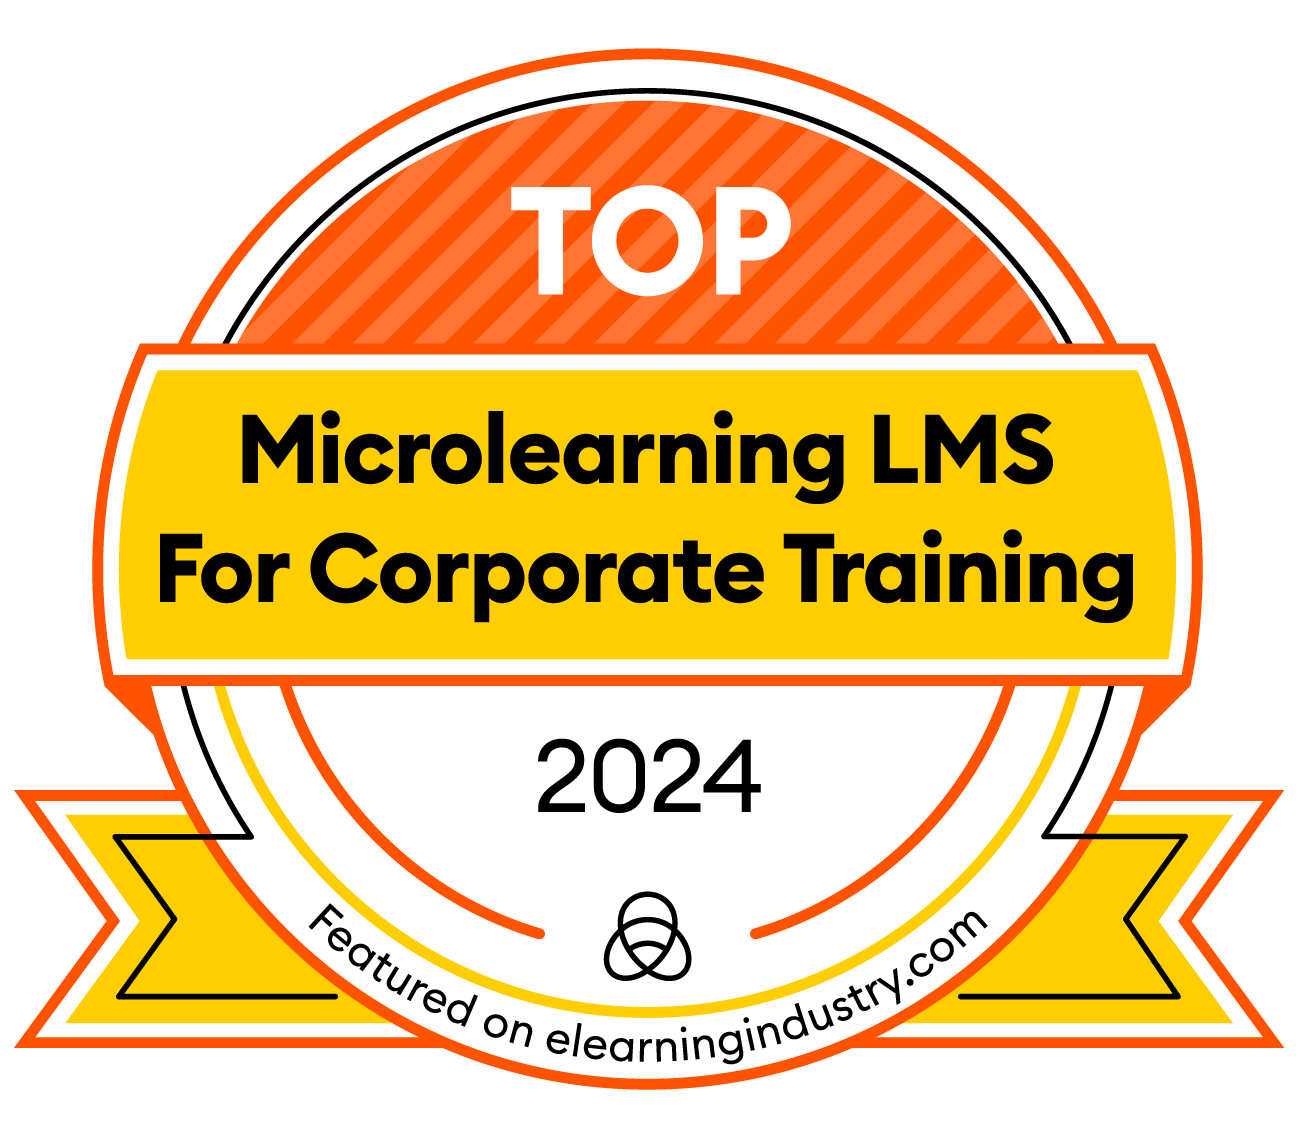 Top Microlearning LMS For Corporate Training 2024